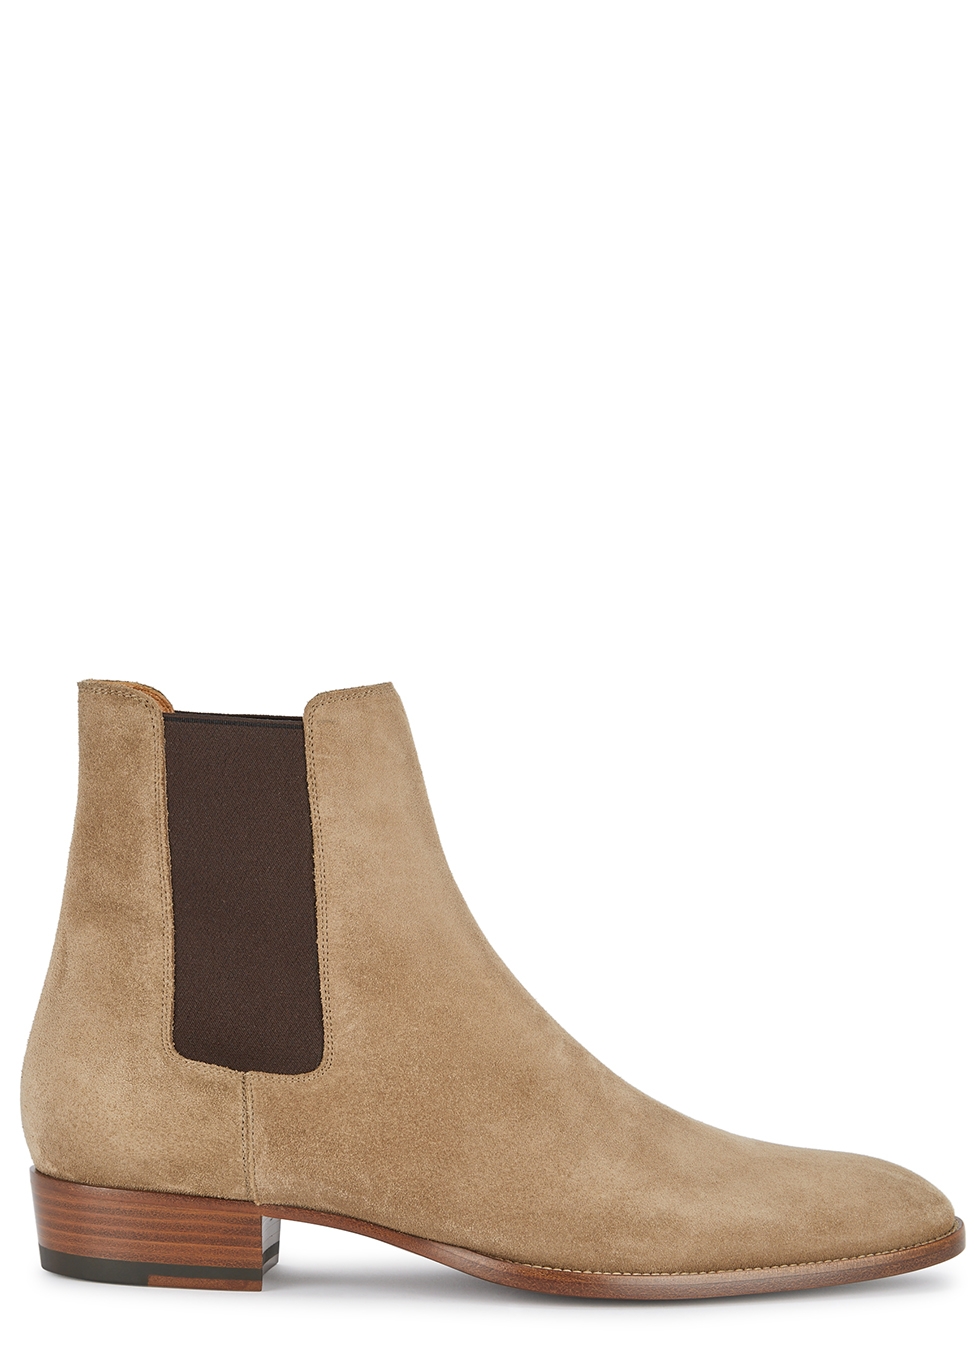 taupe suede boots mens